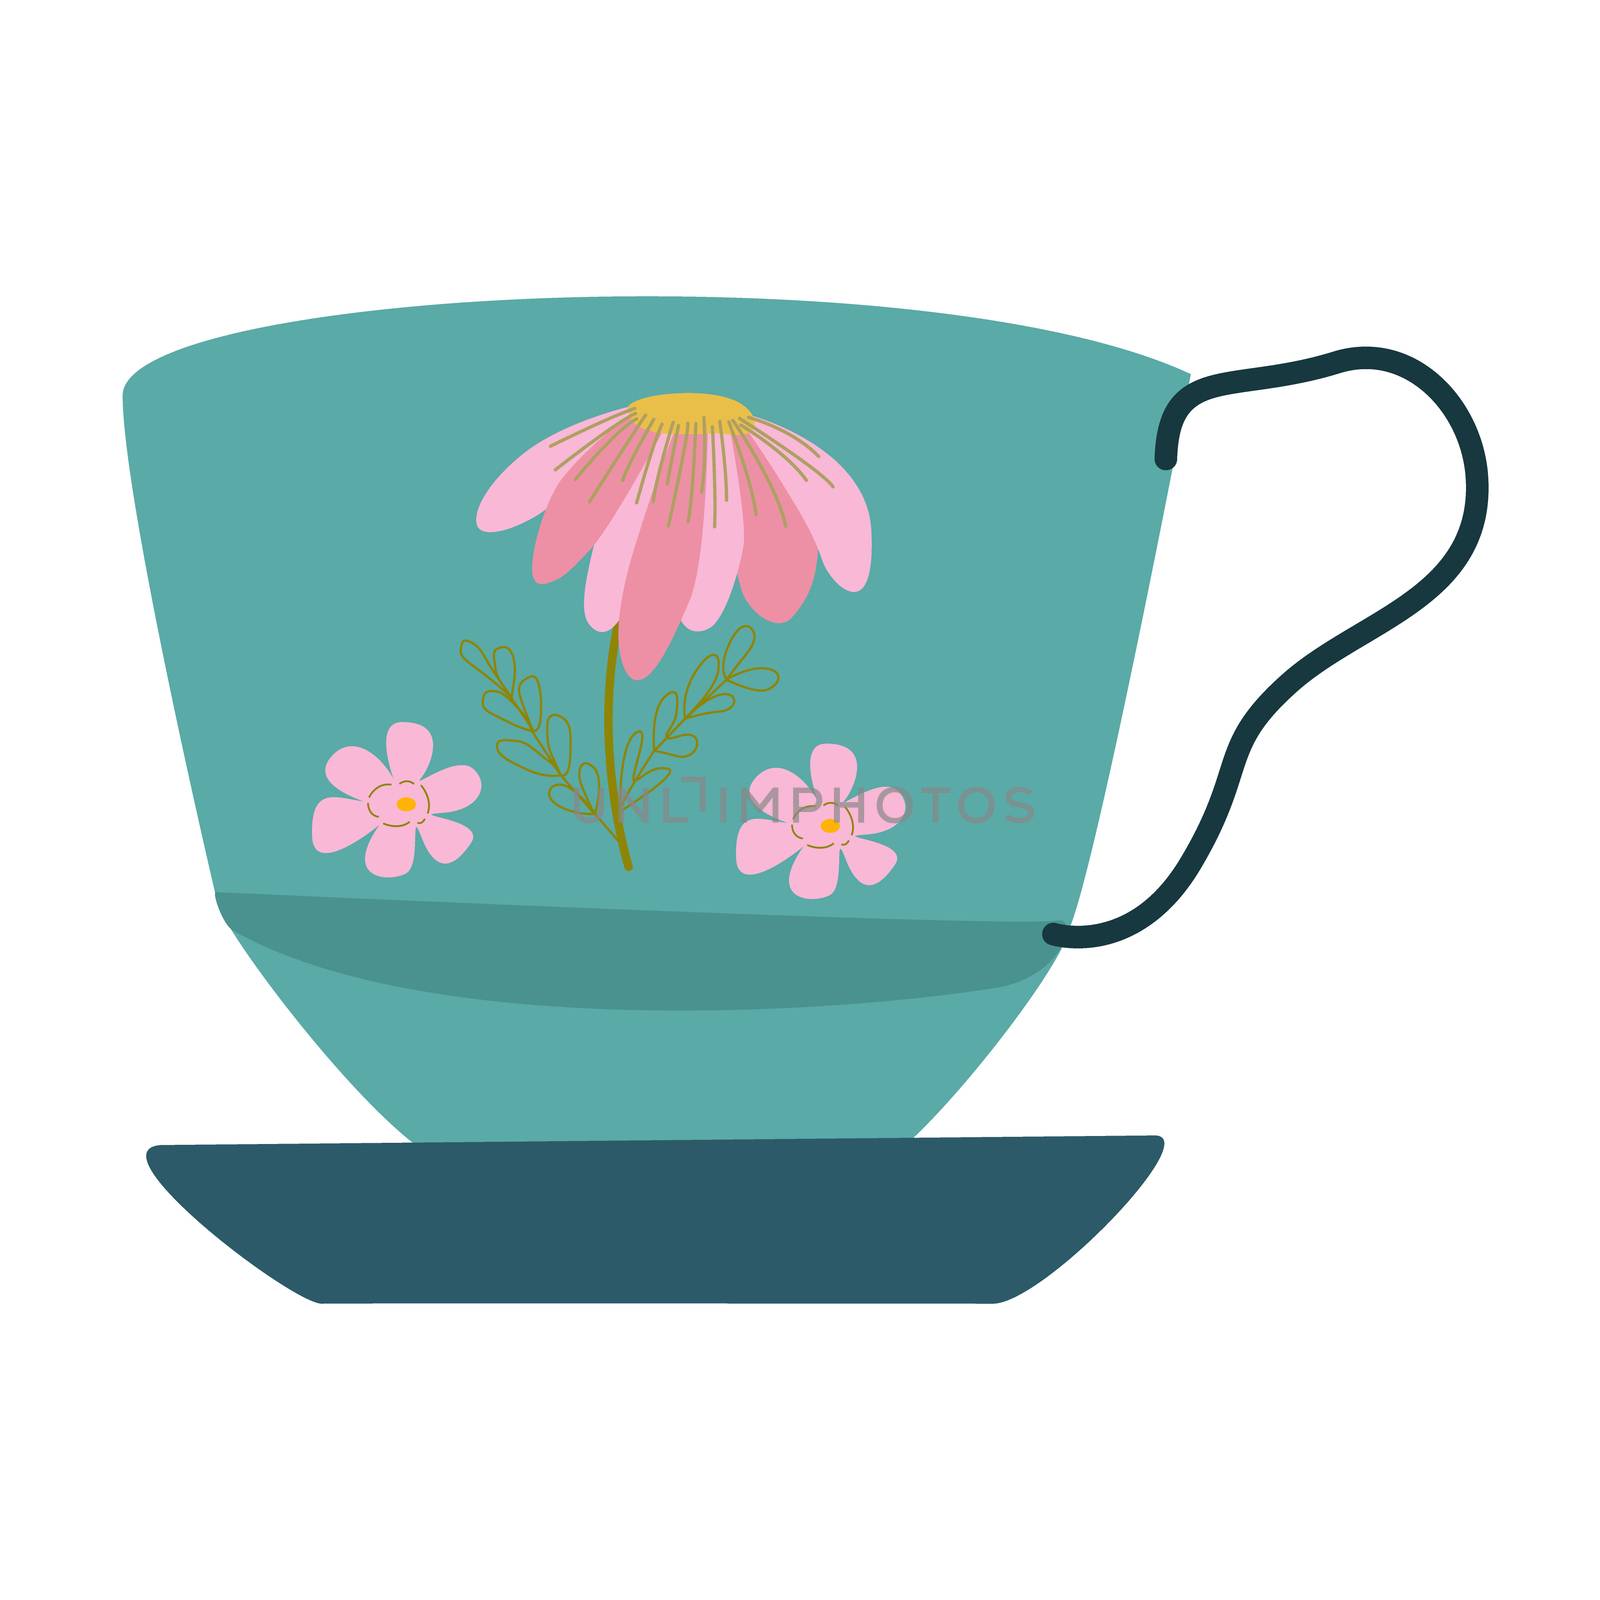 Retro turquoise tea cup with pink daisy decor. by Nata_Prando